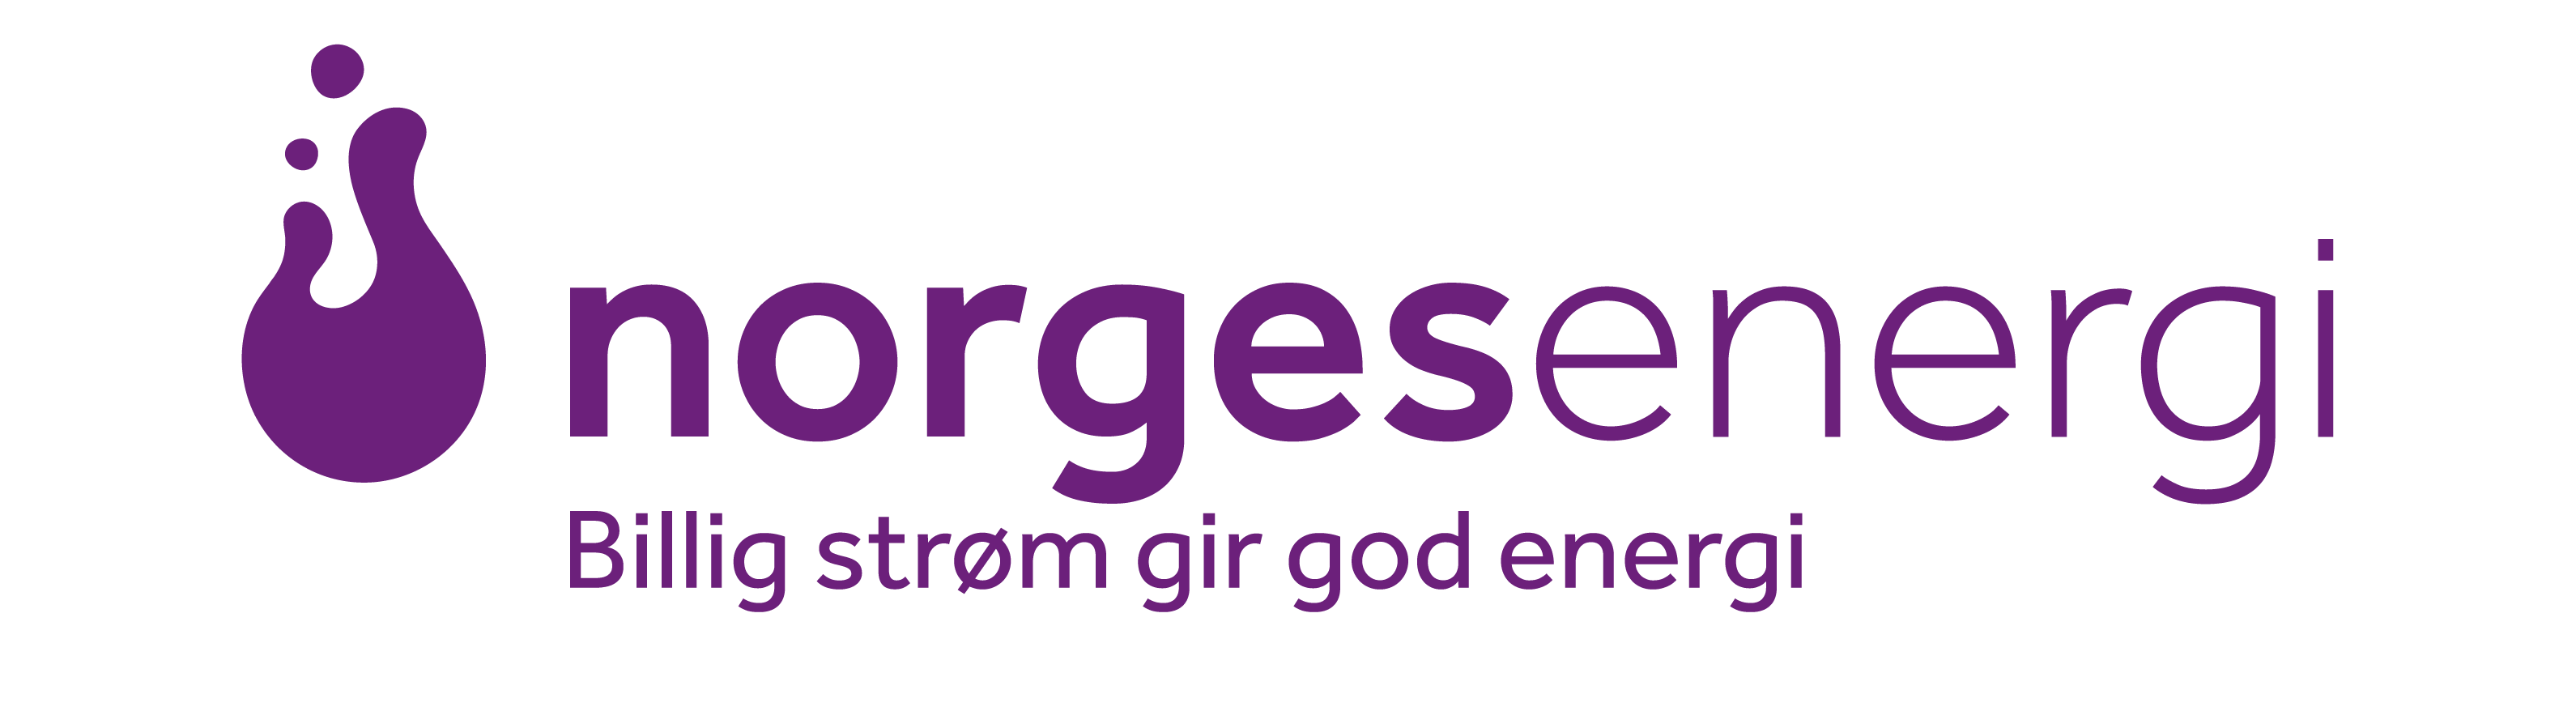 Norges Energi